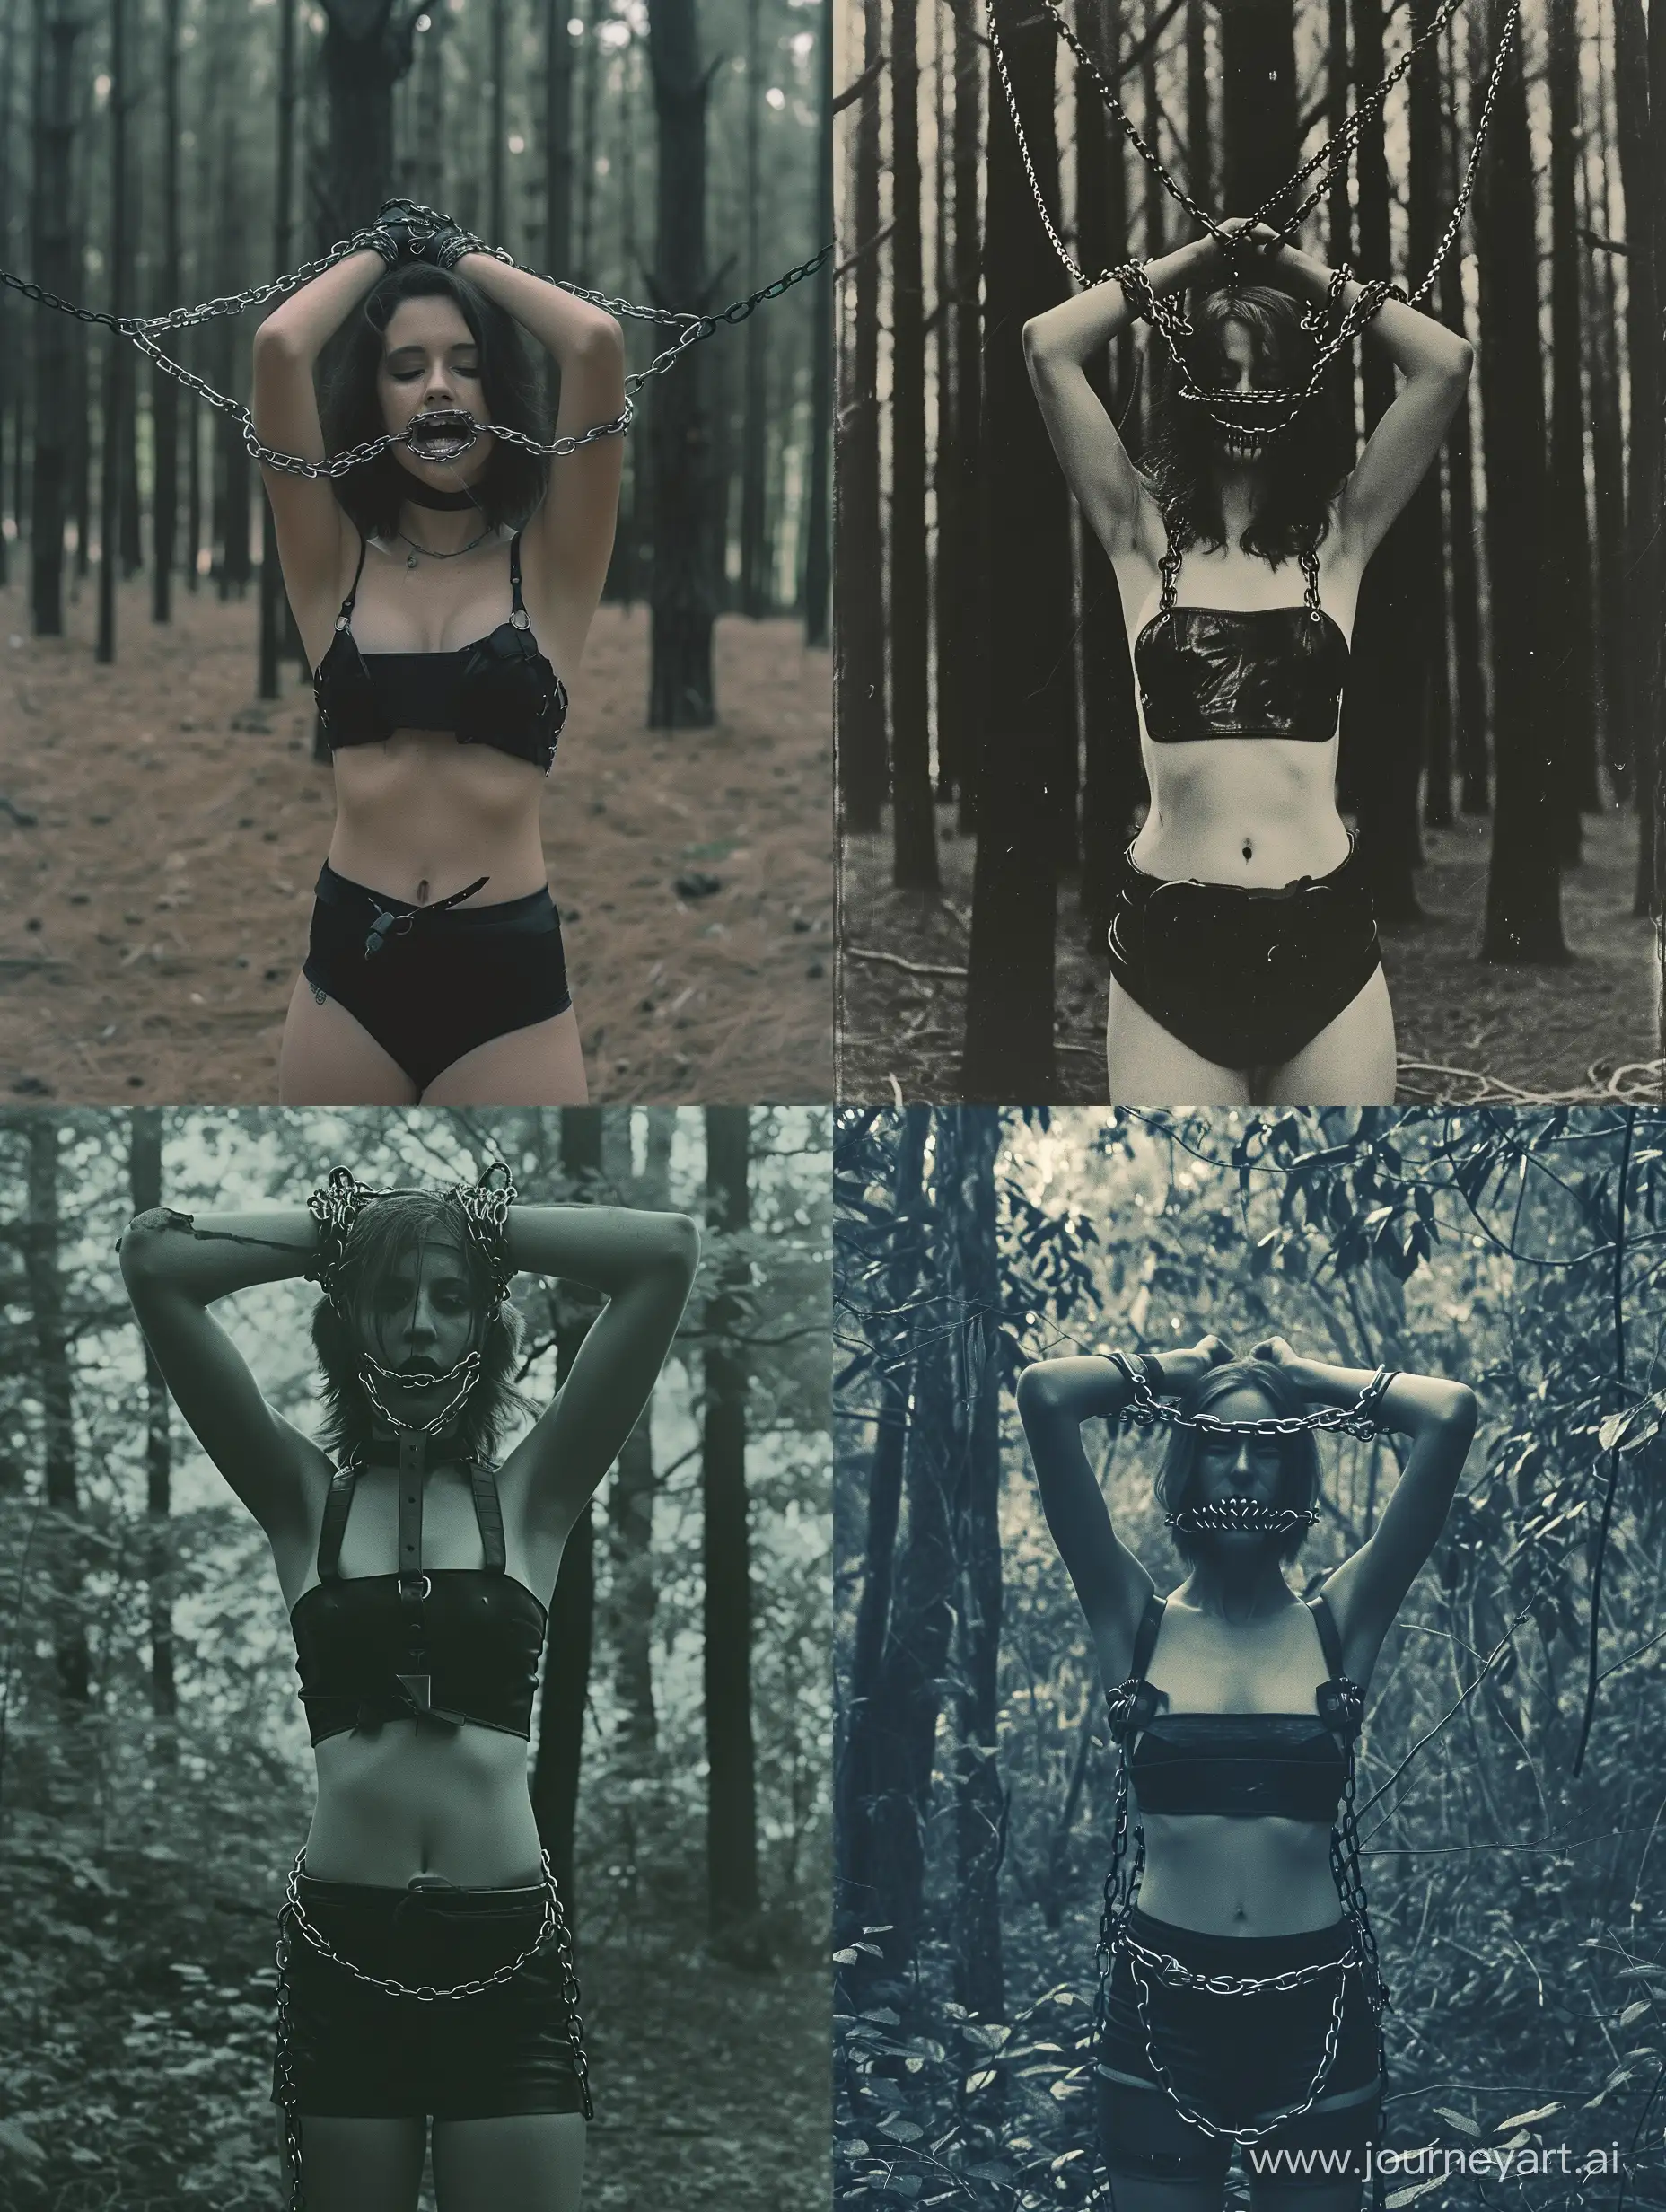 Dark-Aesthetic-Woman-in-Chained-Mouth-Harness-in-Minimalistic-Forest